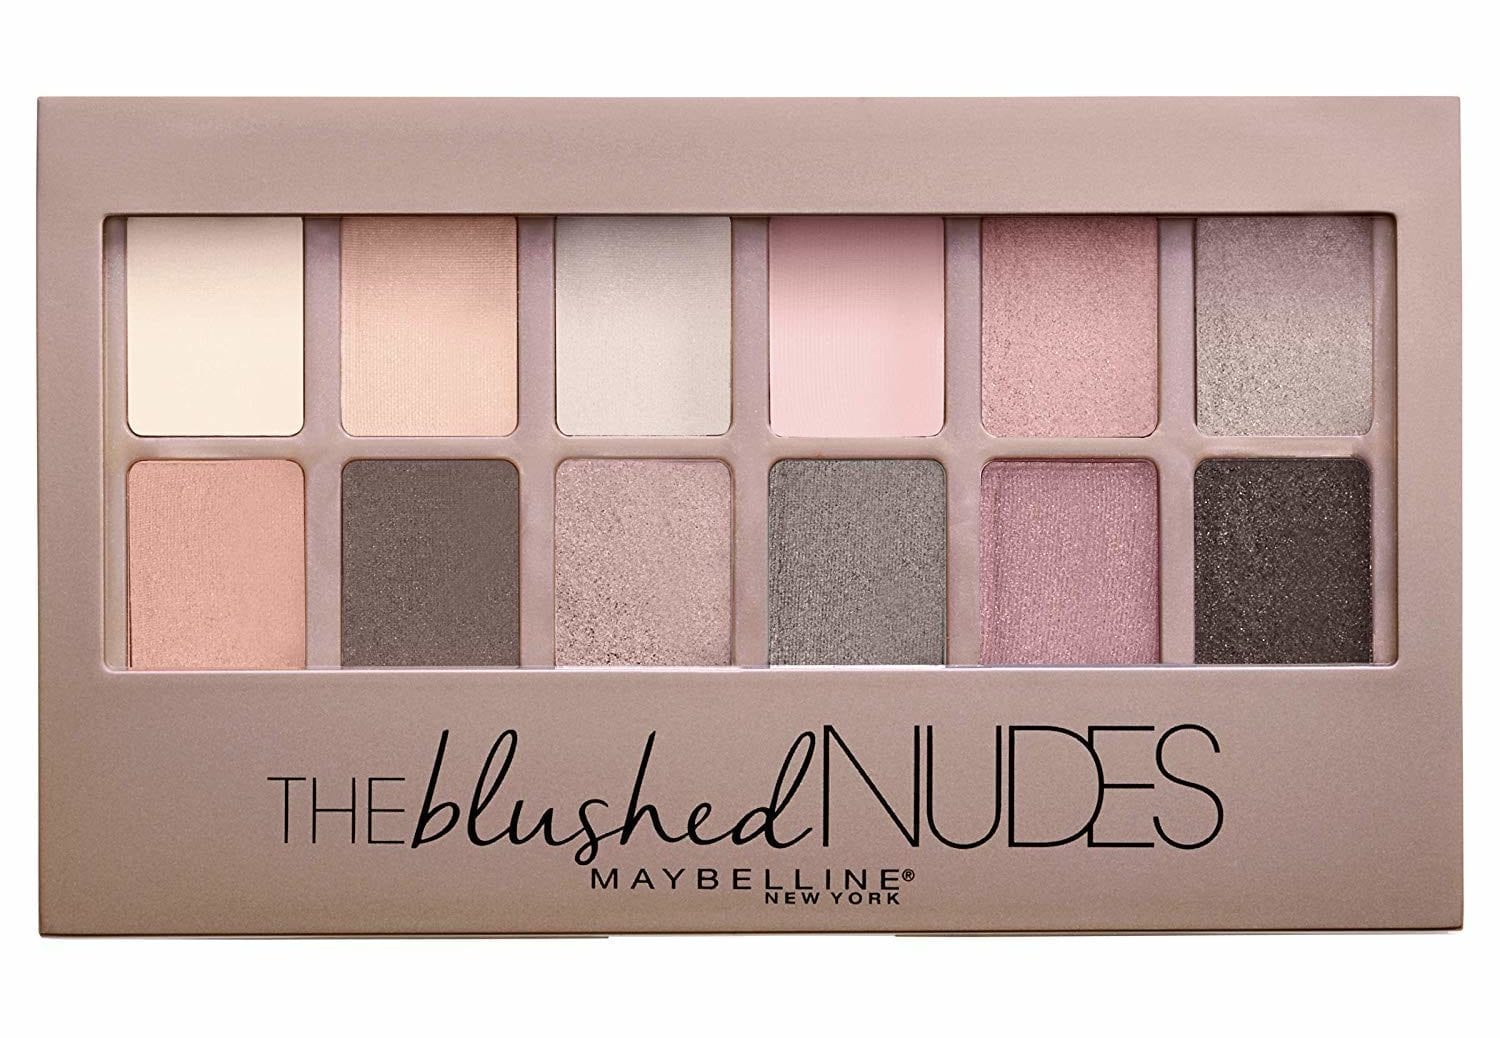 Blushed Nudes Palette from Maybelline New York | Top 15 Eyeshadow Palettes on Amazon